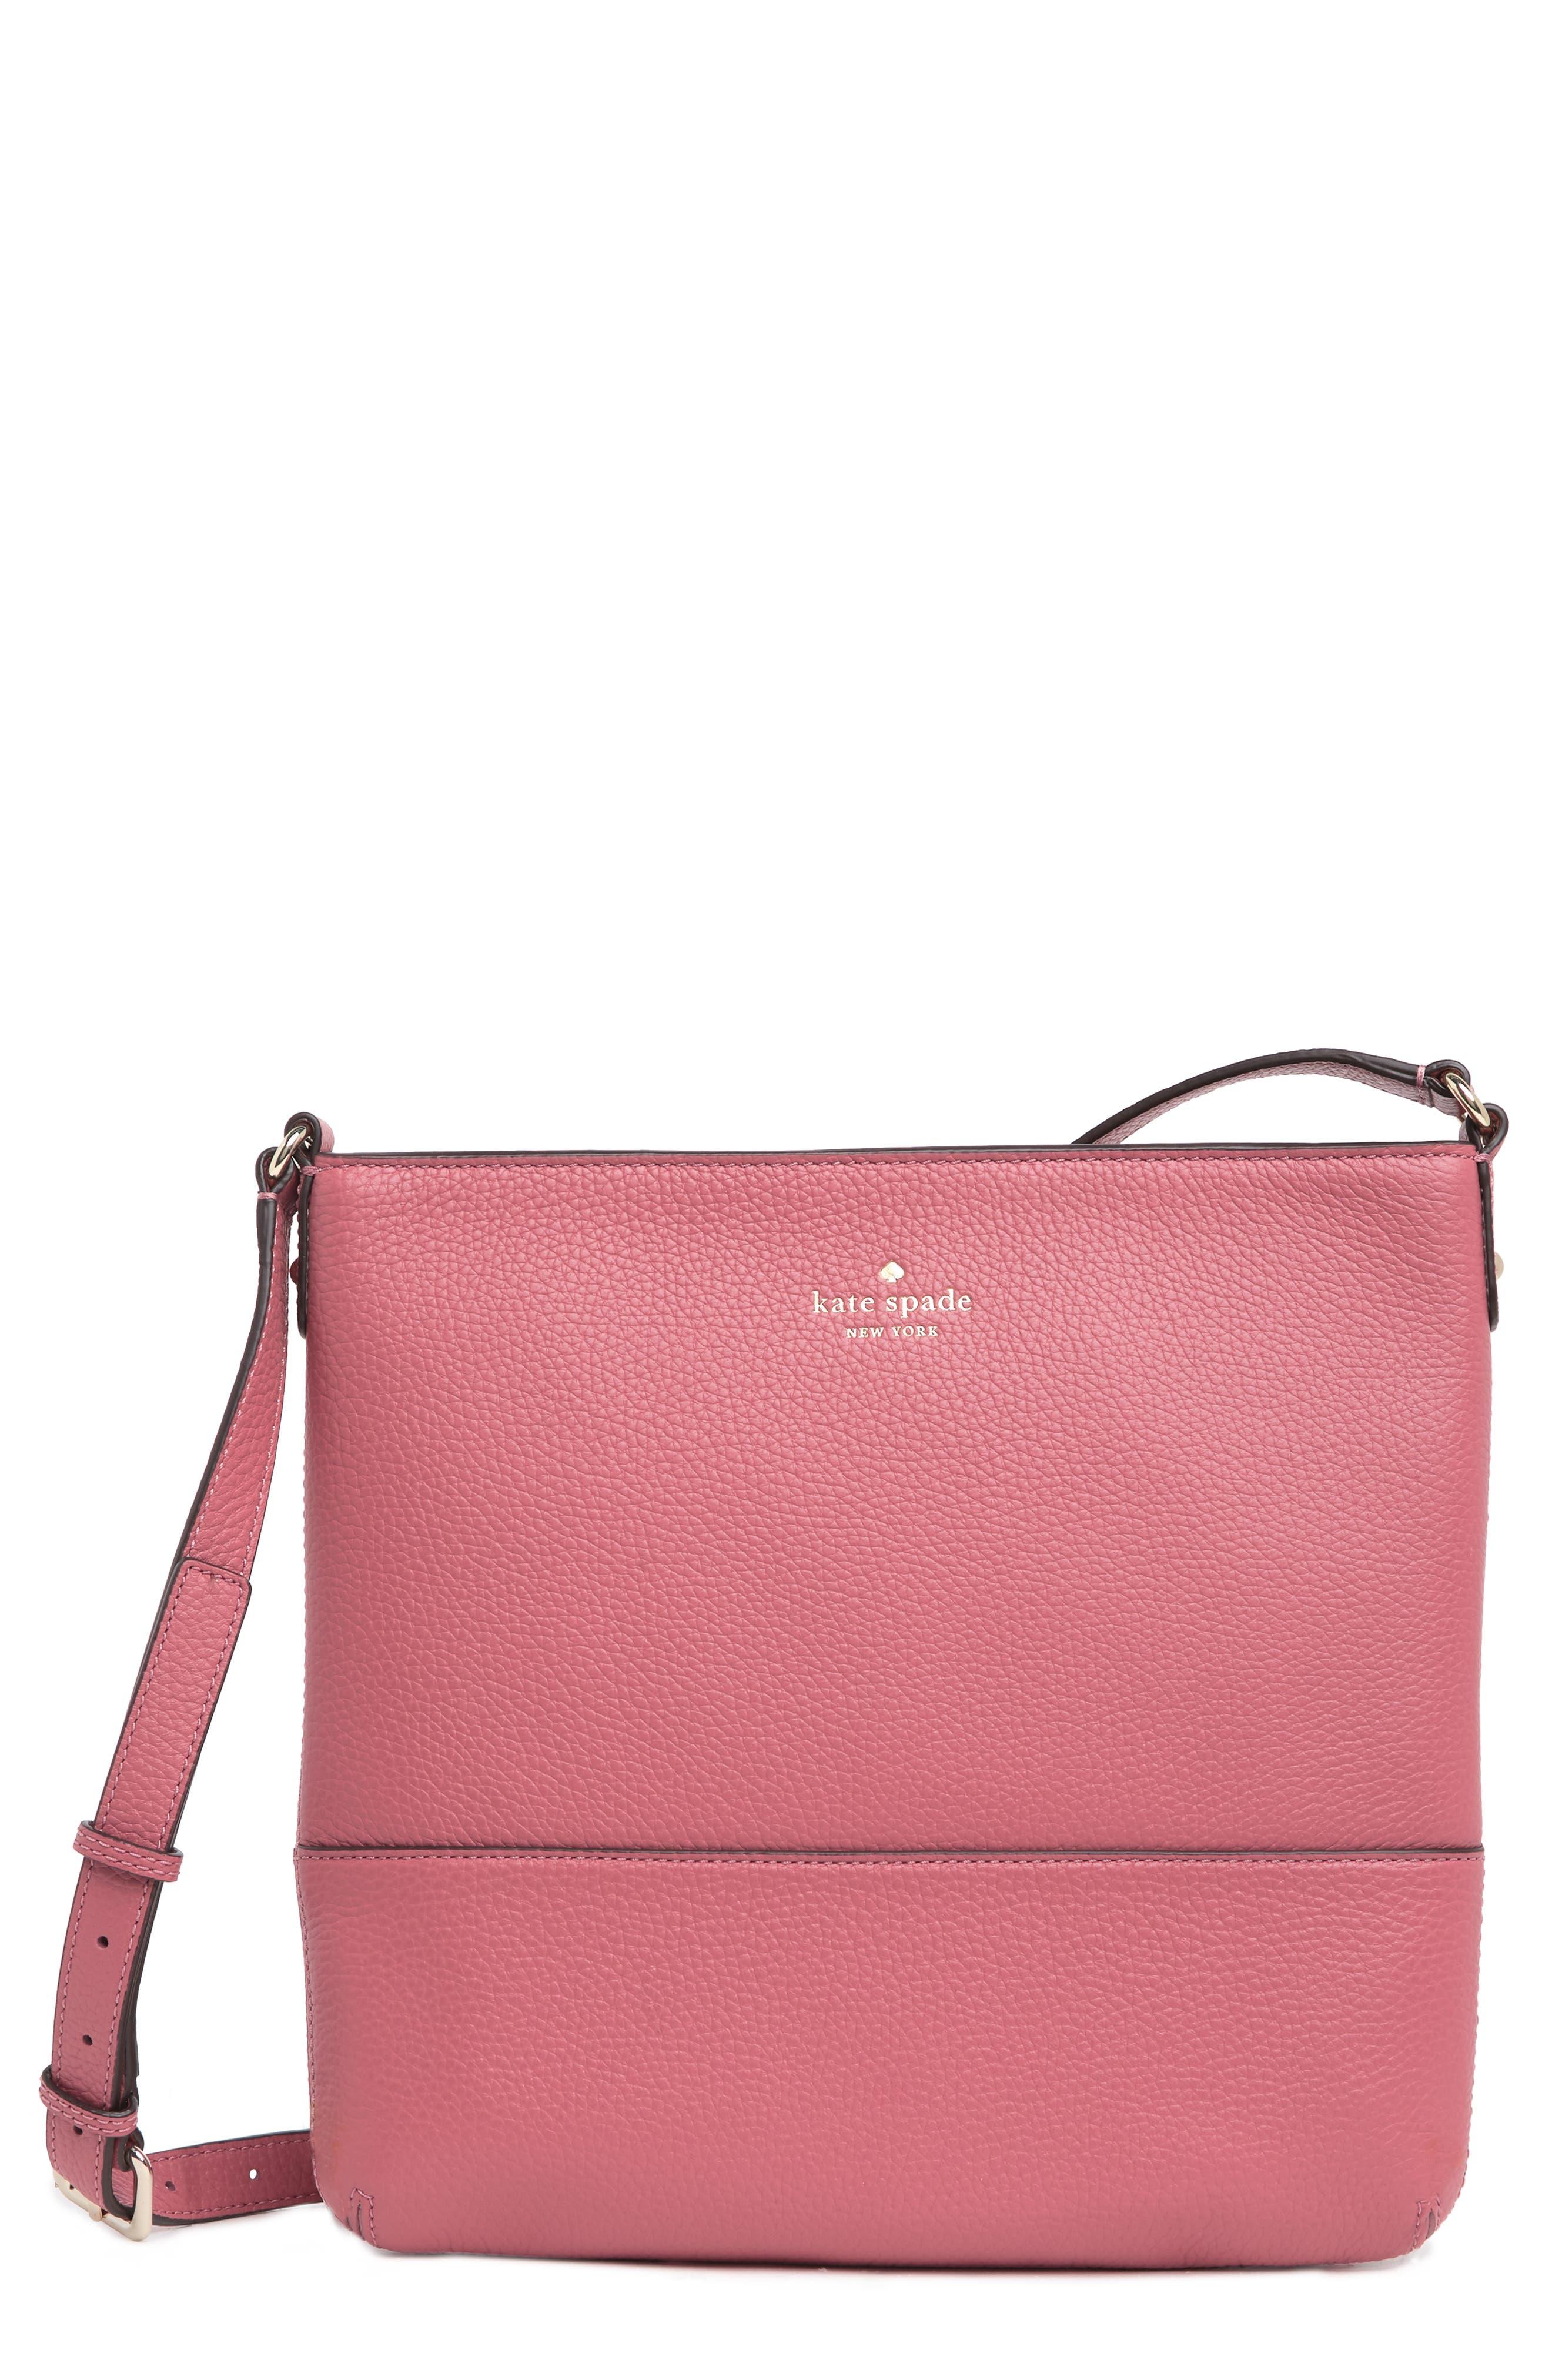 Kate Spade Southport Avenue Cora Crossbody Bag in Pink